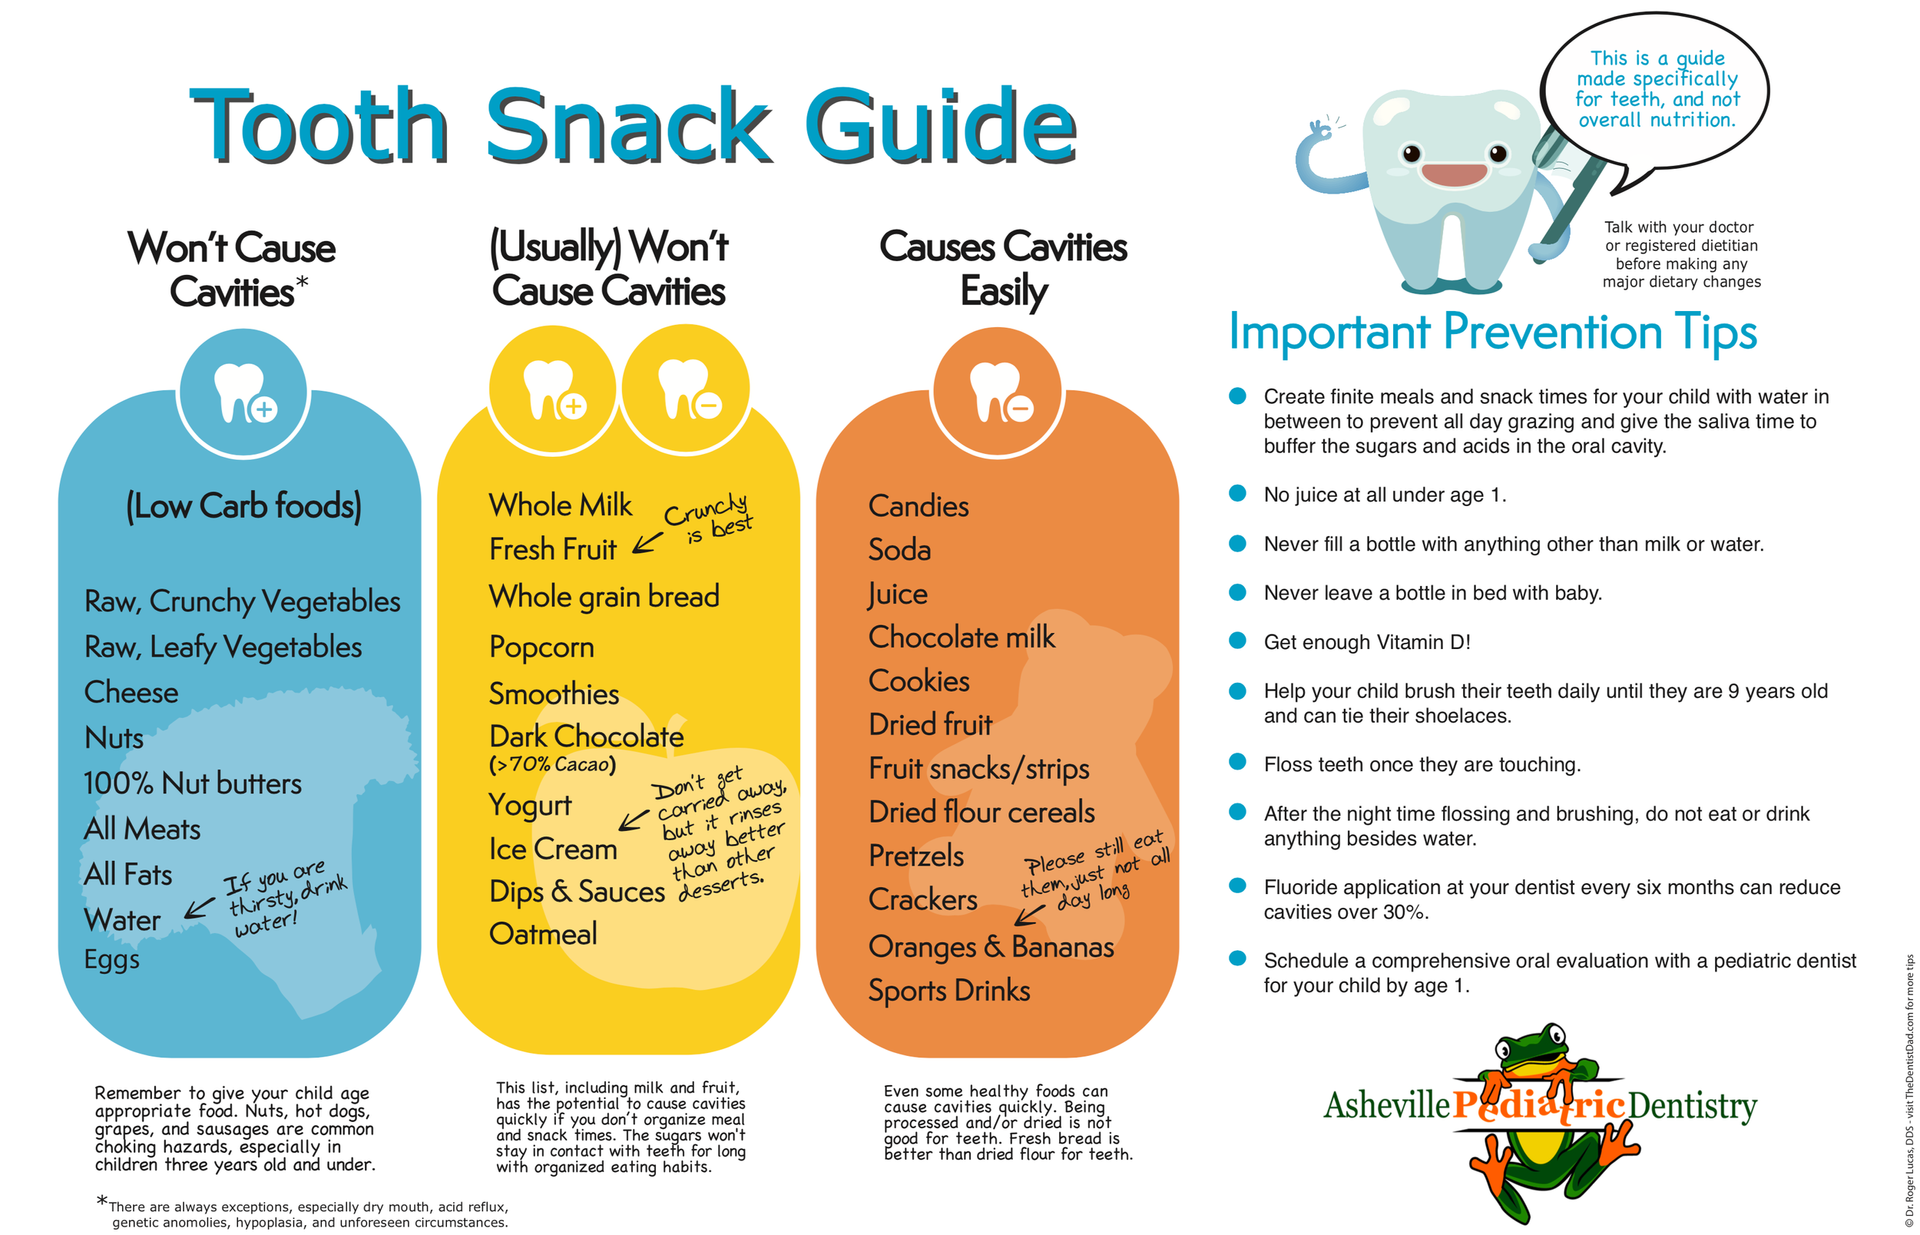 A tooth snack guide with important prevention tips tips and guides Asheville Pediatric Dentistry (828) 277-6788